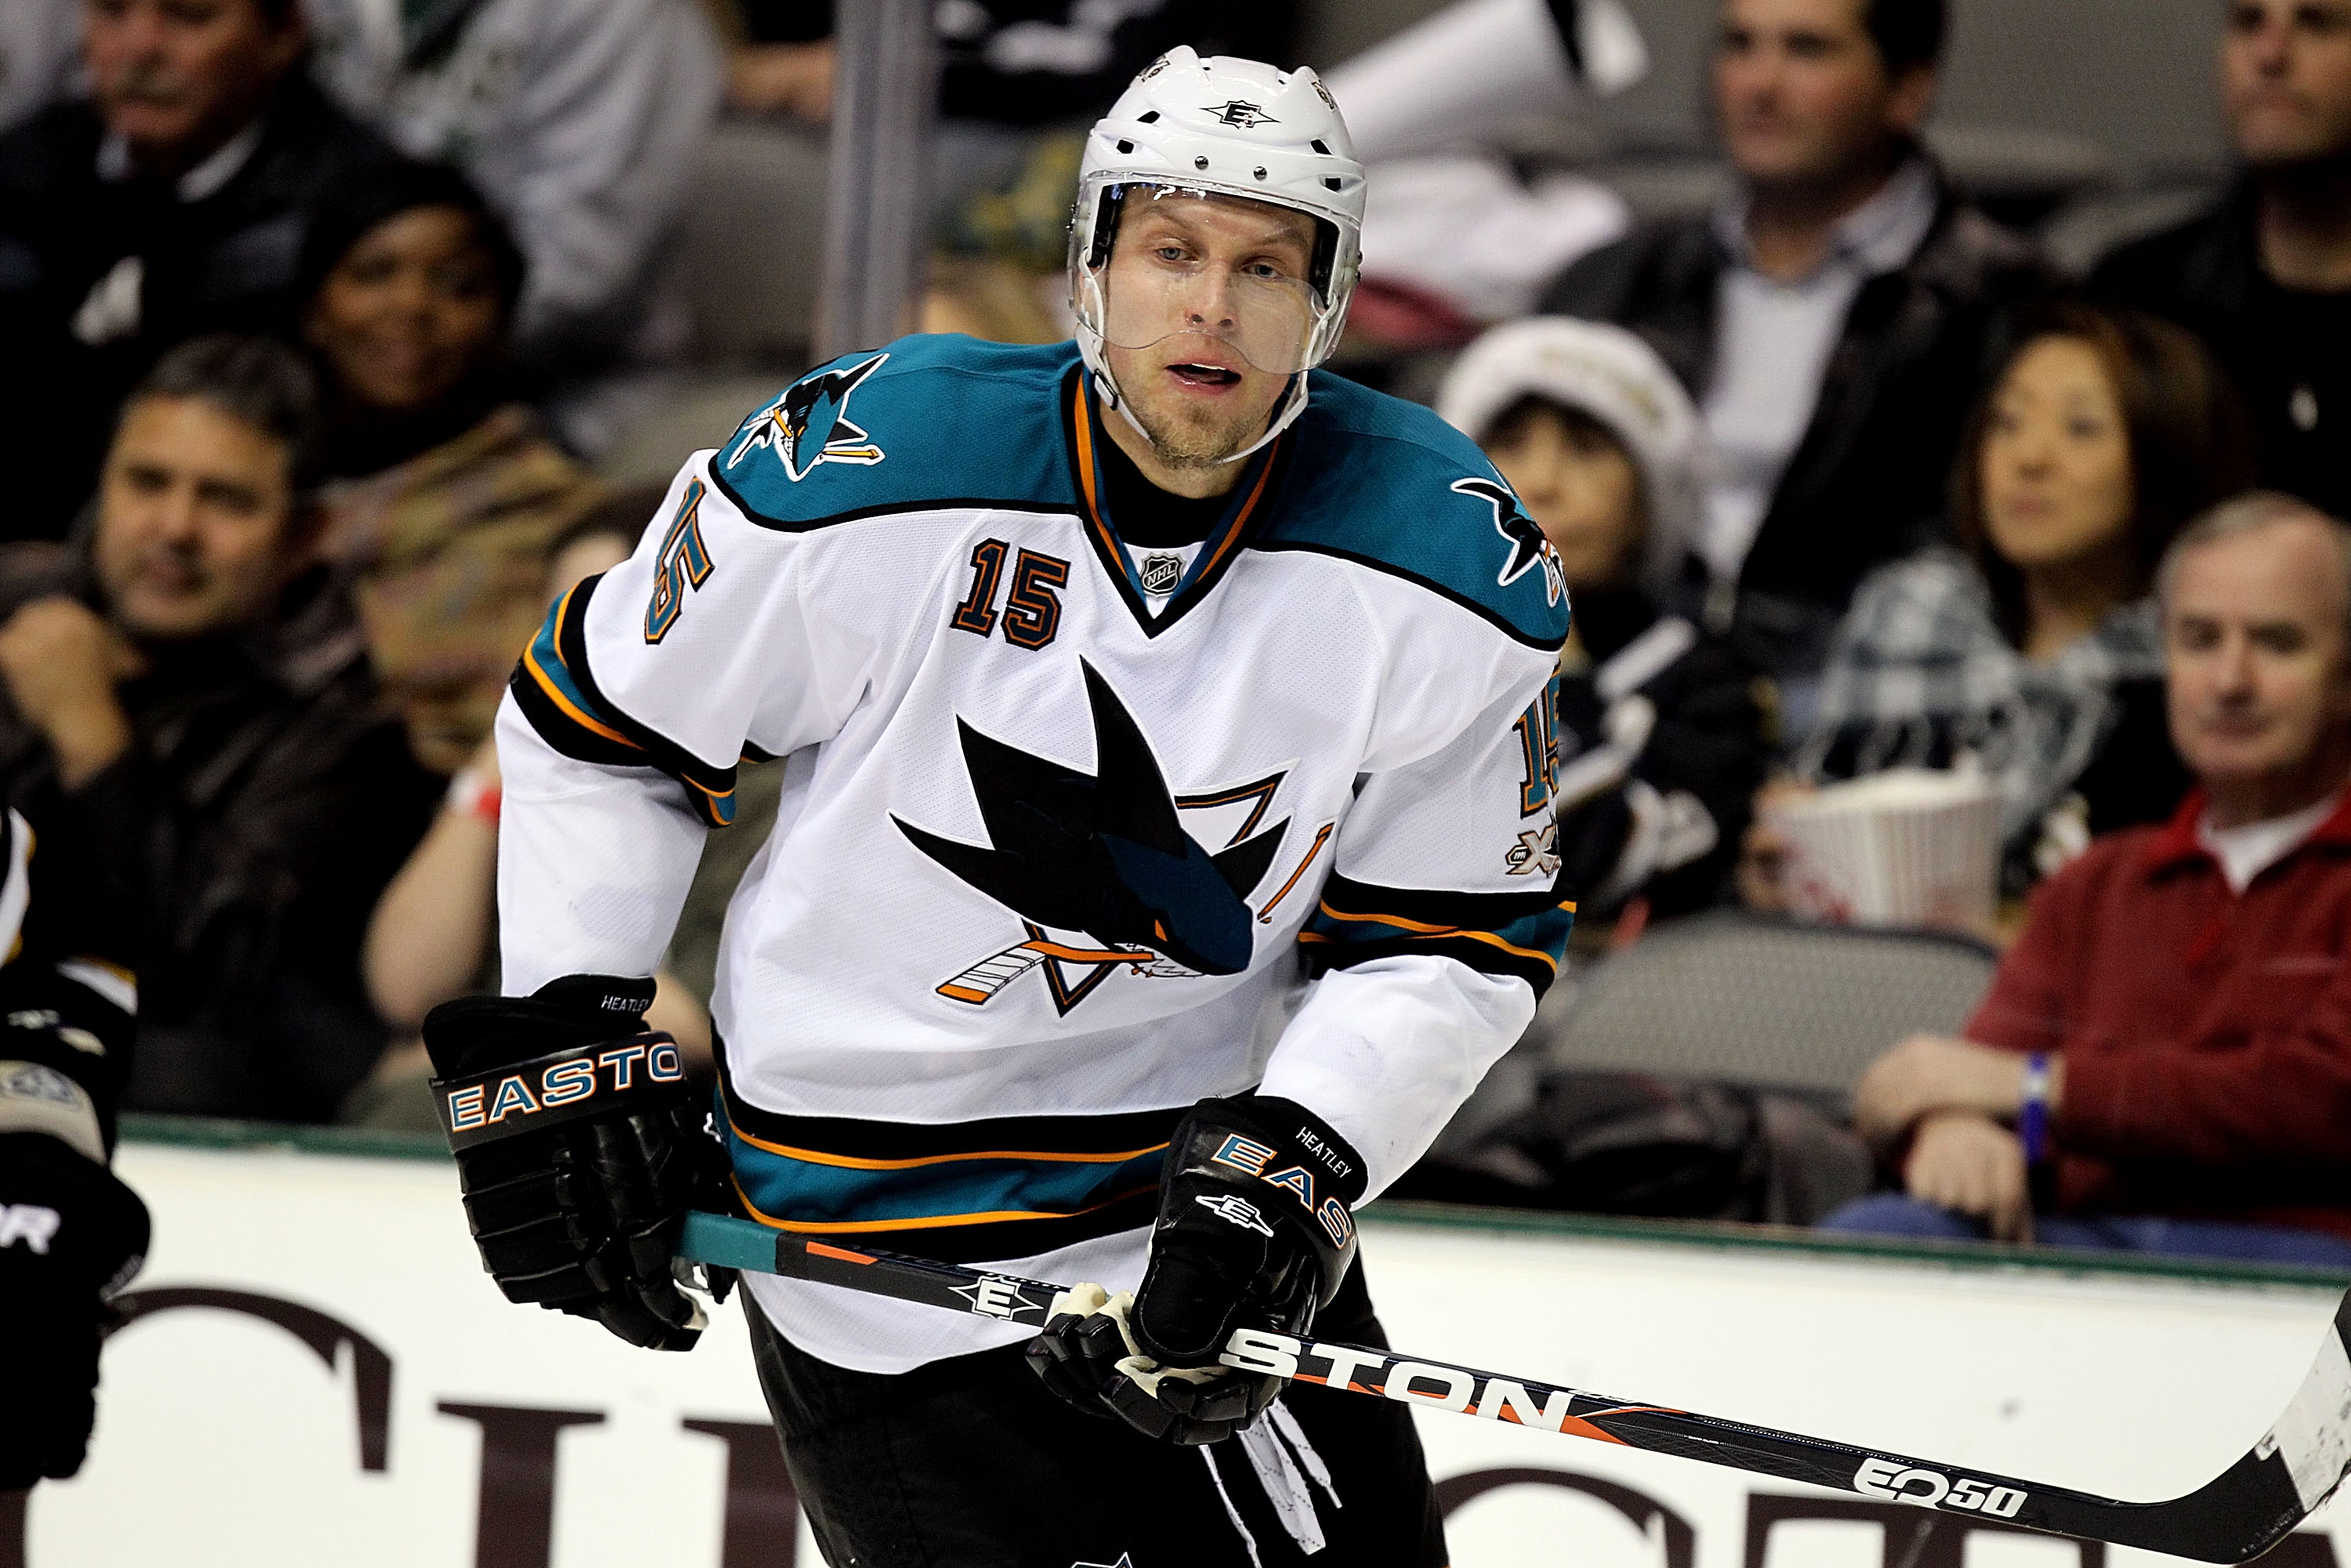 DALLAS, TX - DECEMBER 16:  Right wing Dany Heatley #15 of the San Jose Sharks on December 16, 2010 in Dallas, Texas.  (Photo by Ronald Martinez/Getty Images)